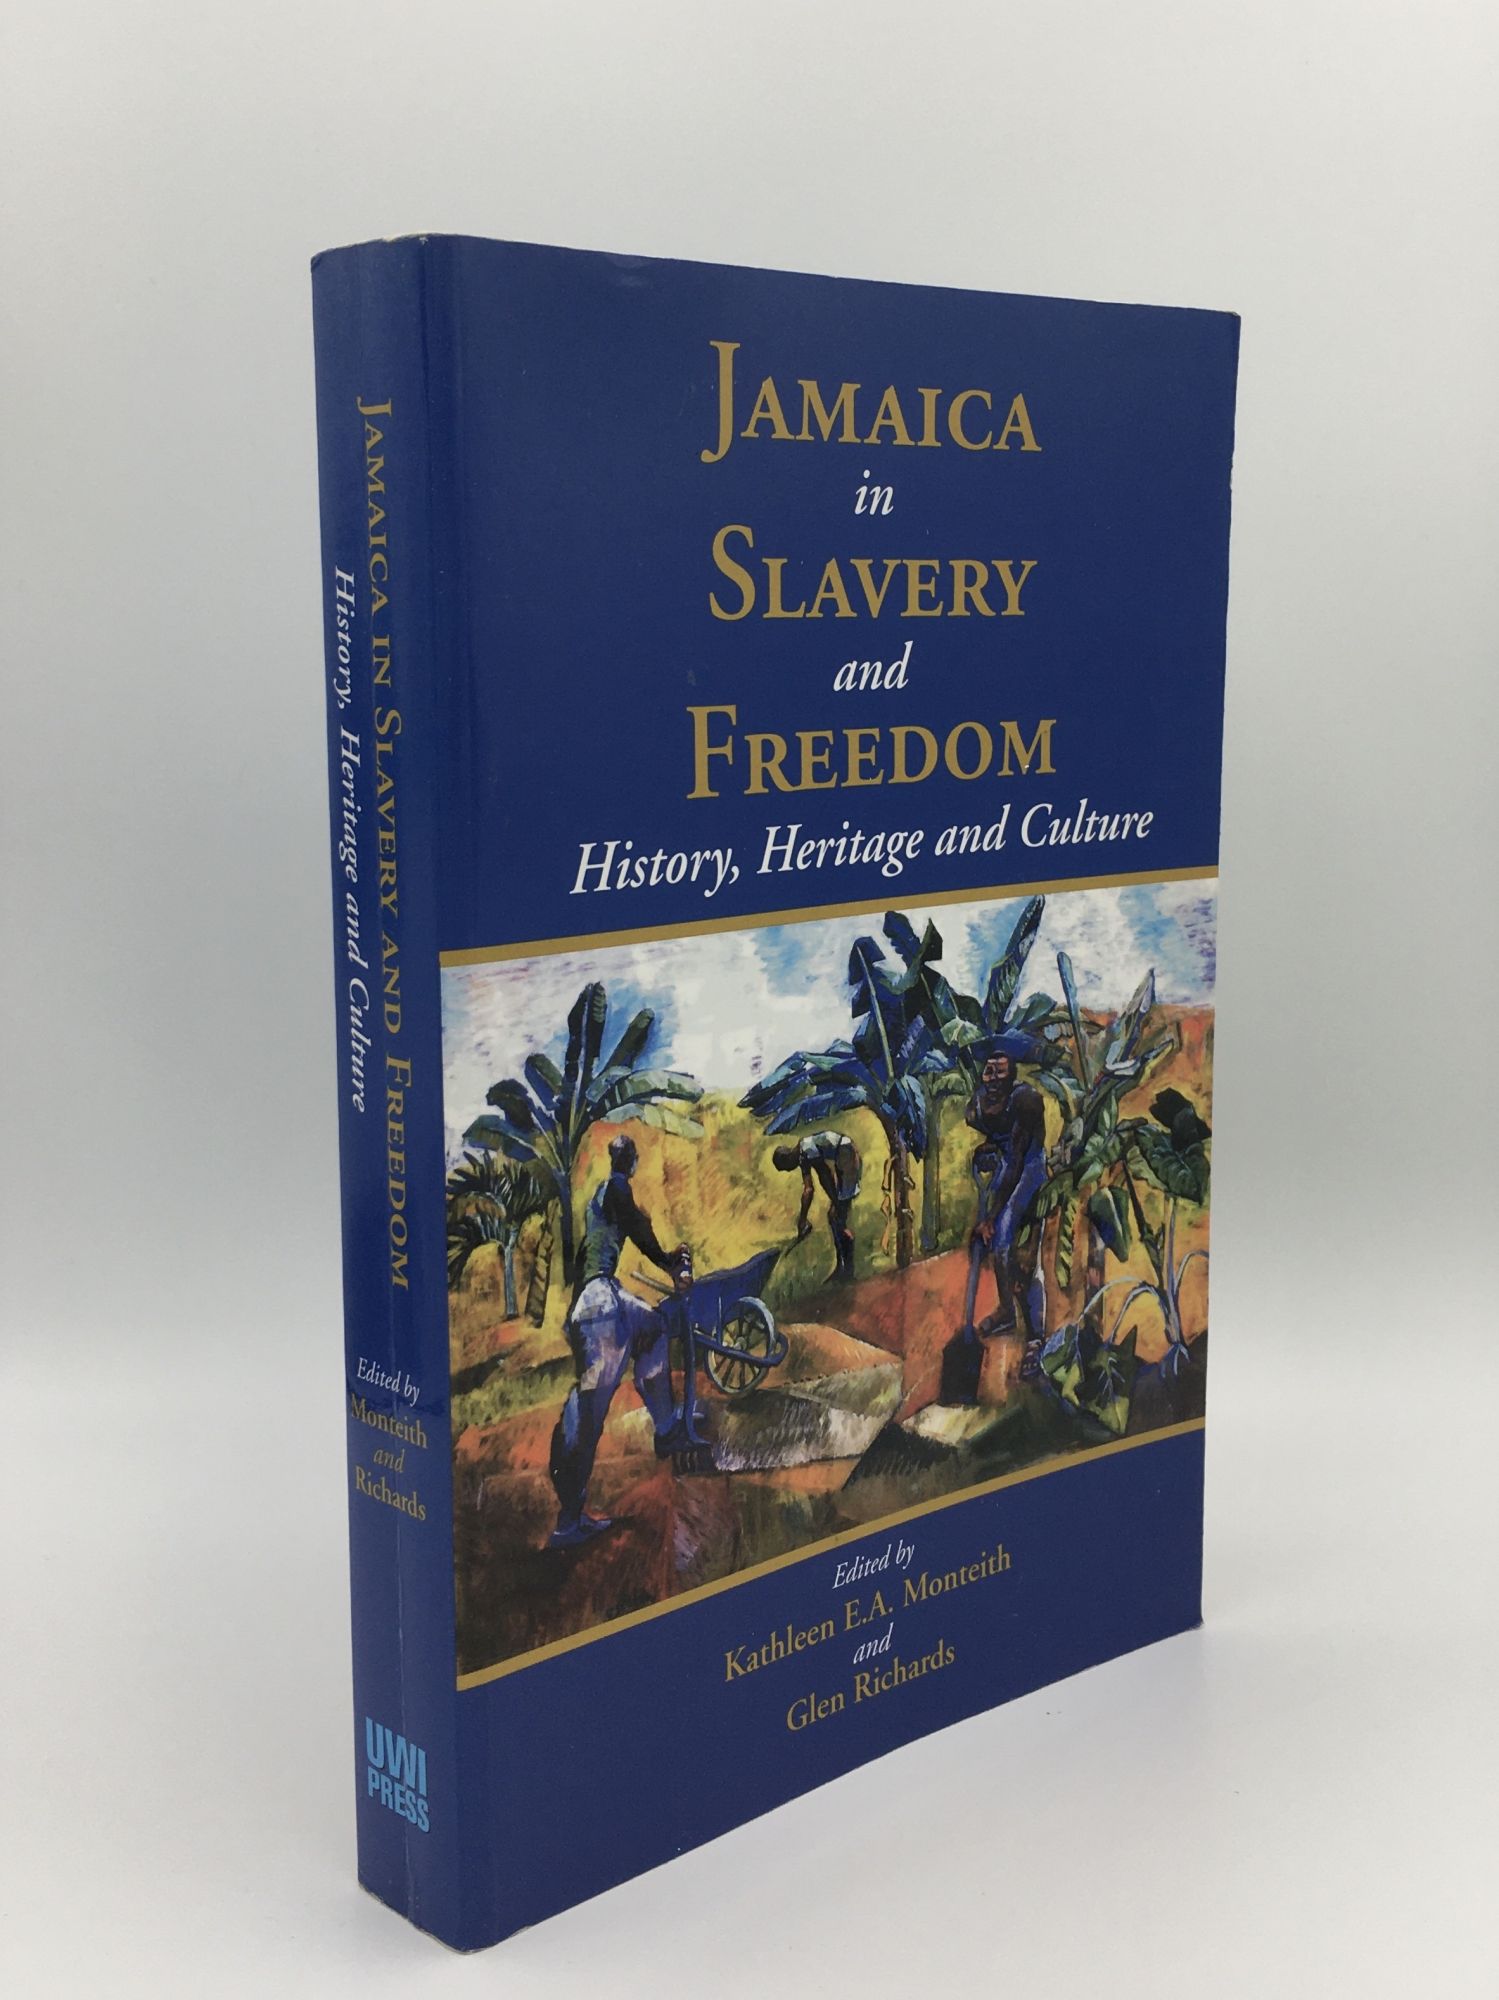 JAMAICA IN SLAVERY AND FREEDOM History Heritage and Culture - MONTEITH Kathleen E. A., RICHARDS Glen